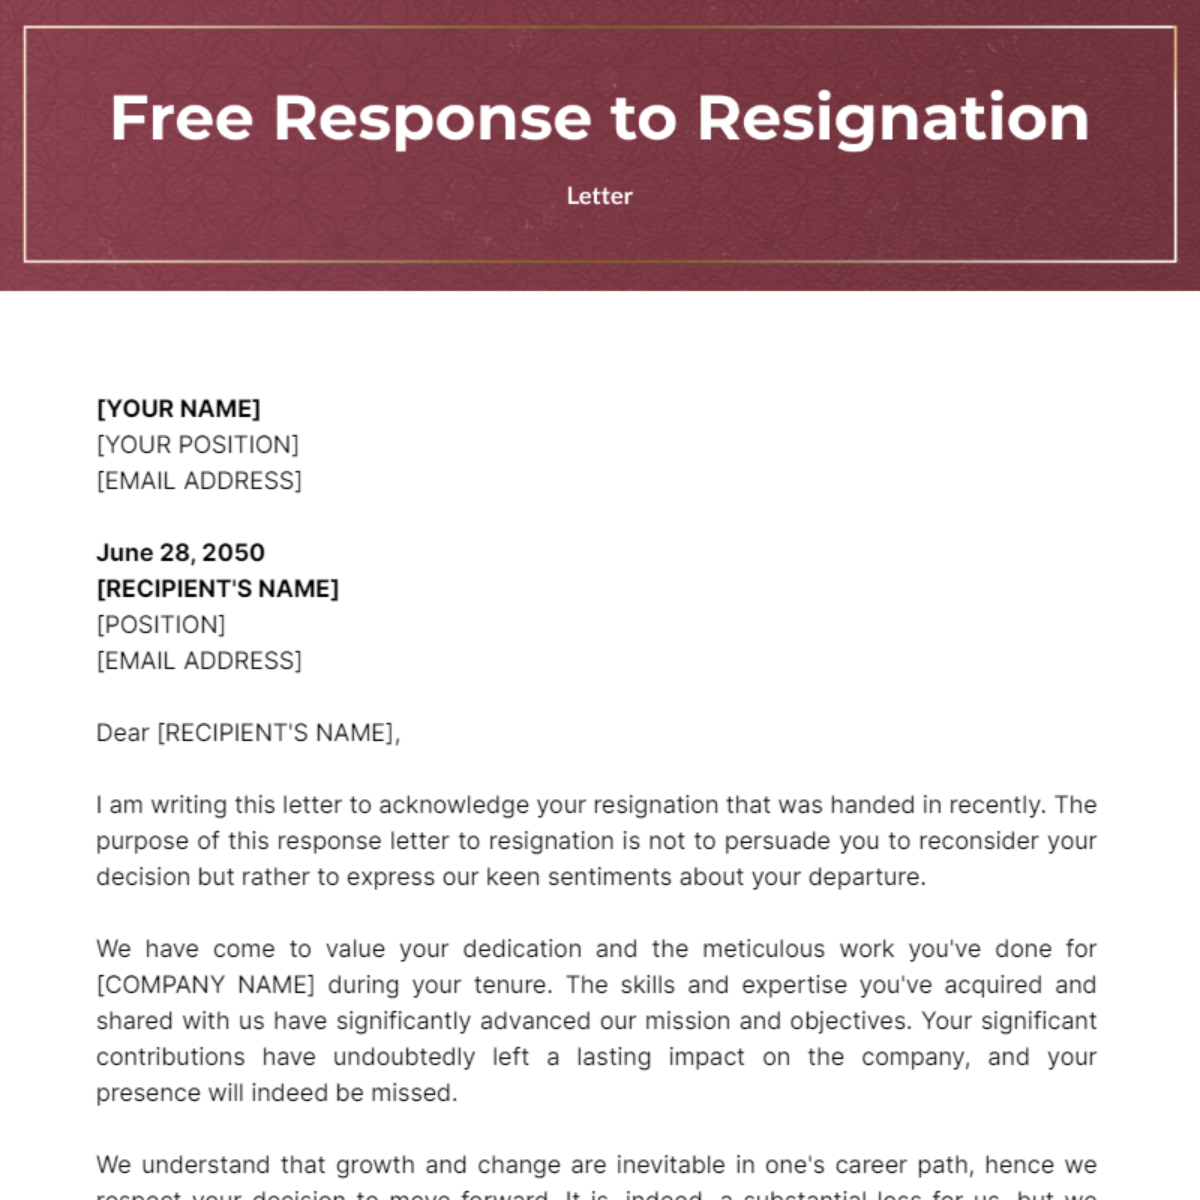 Free Response Letter to Resignation